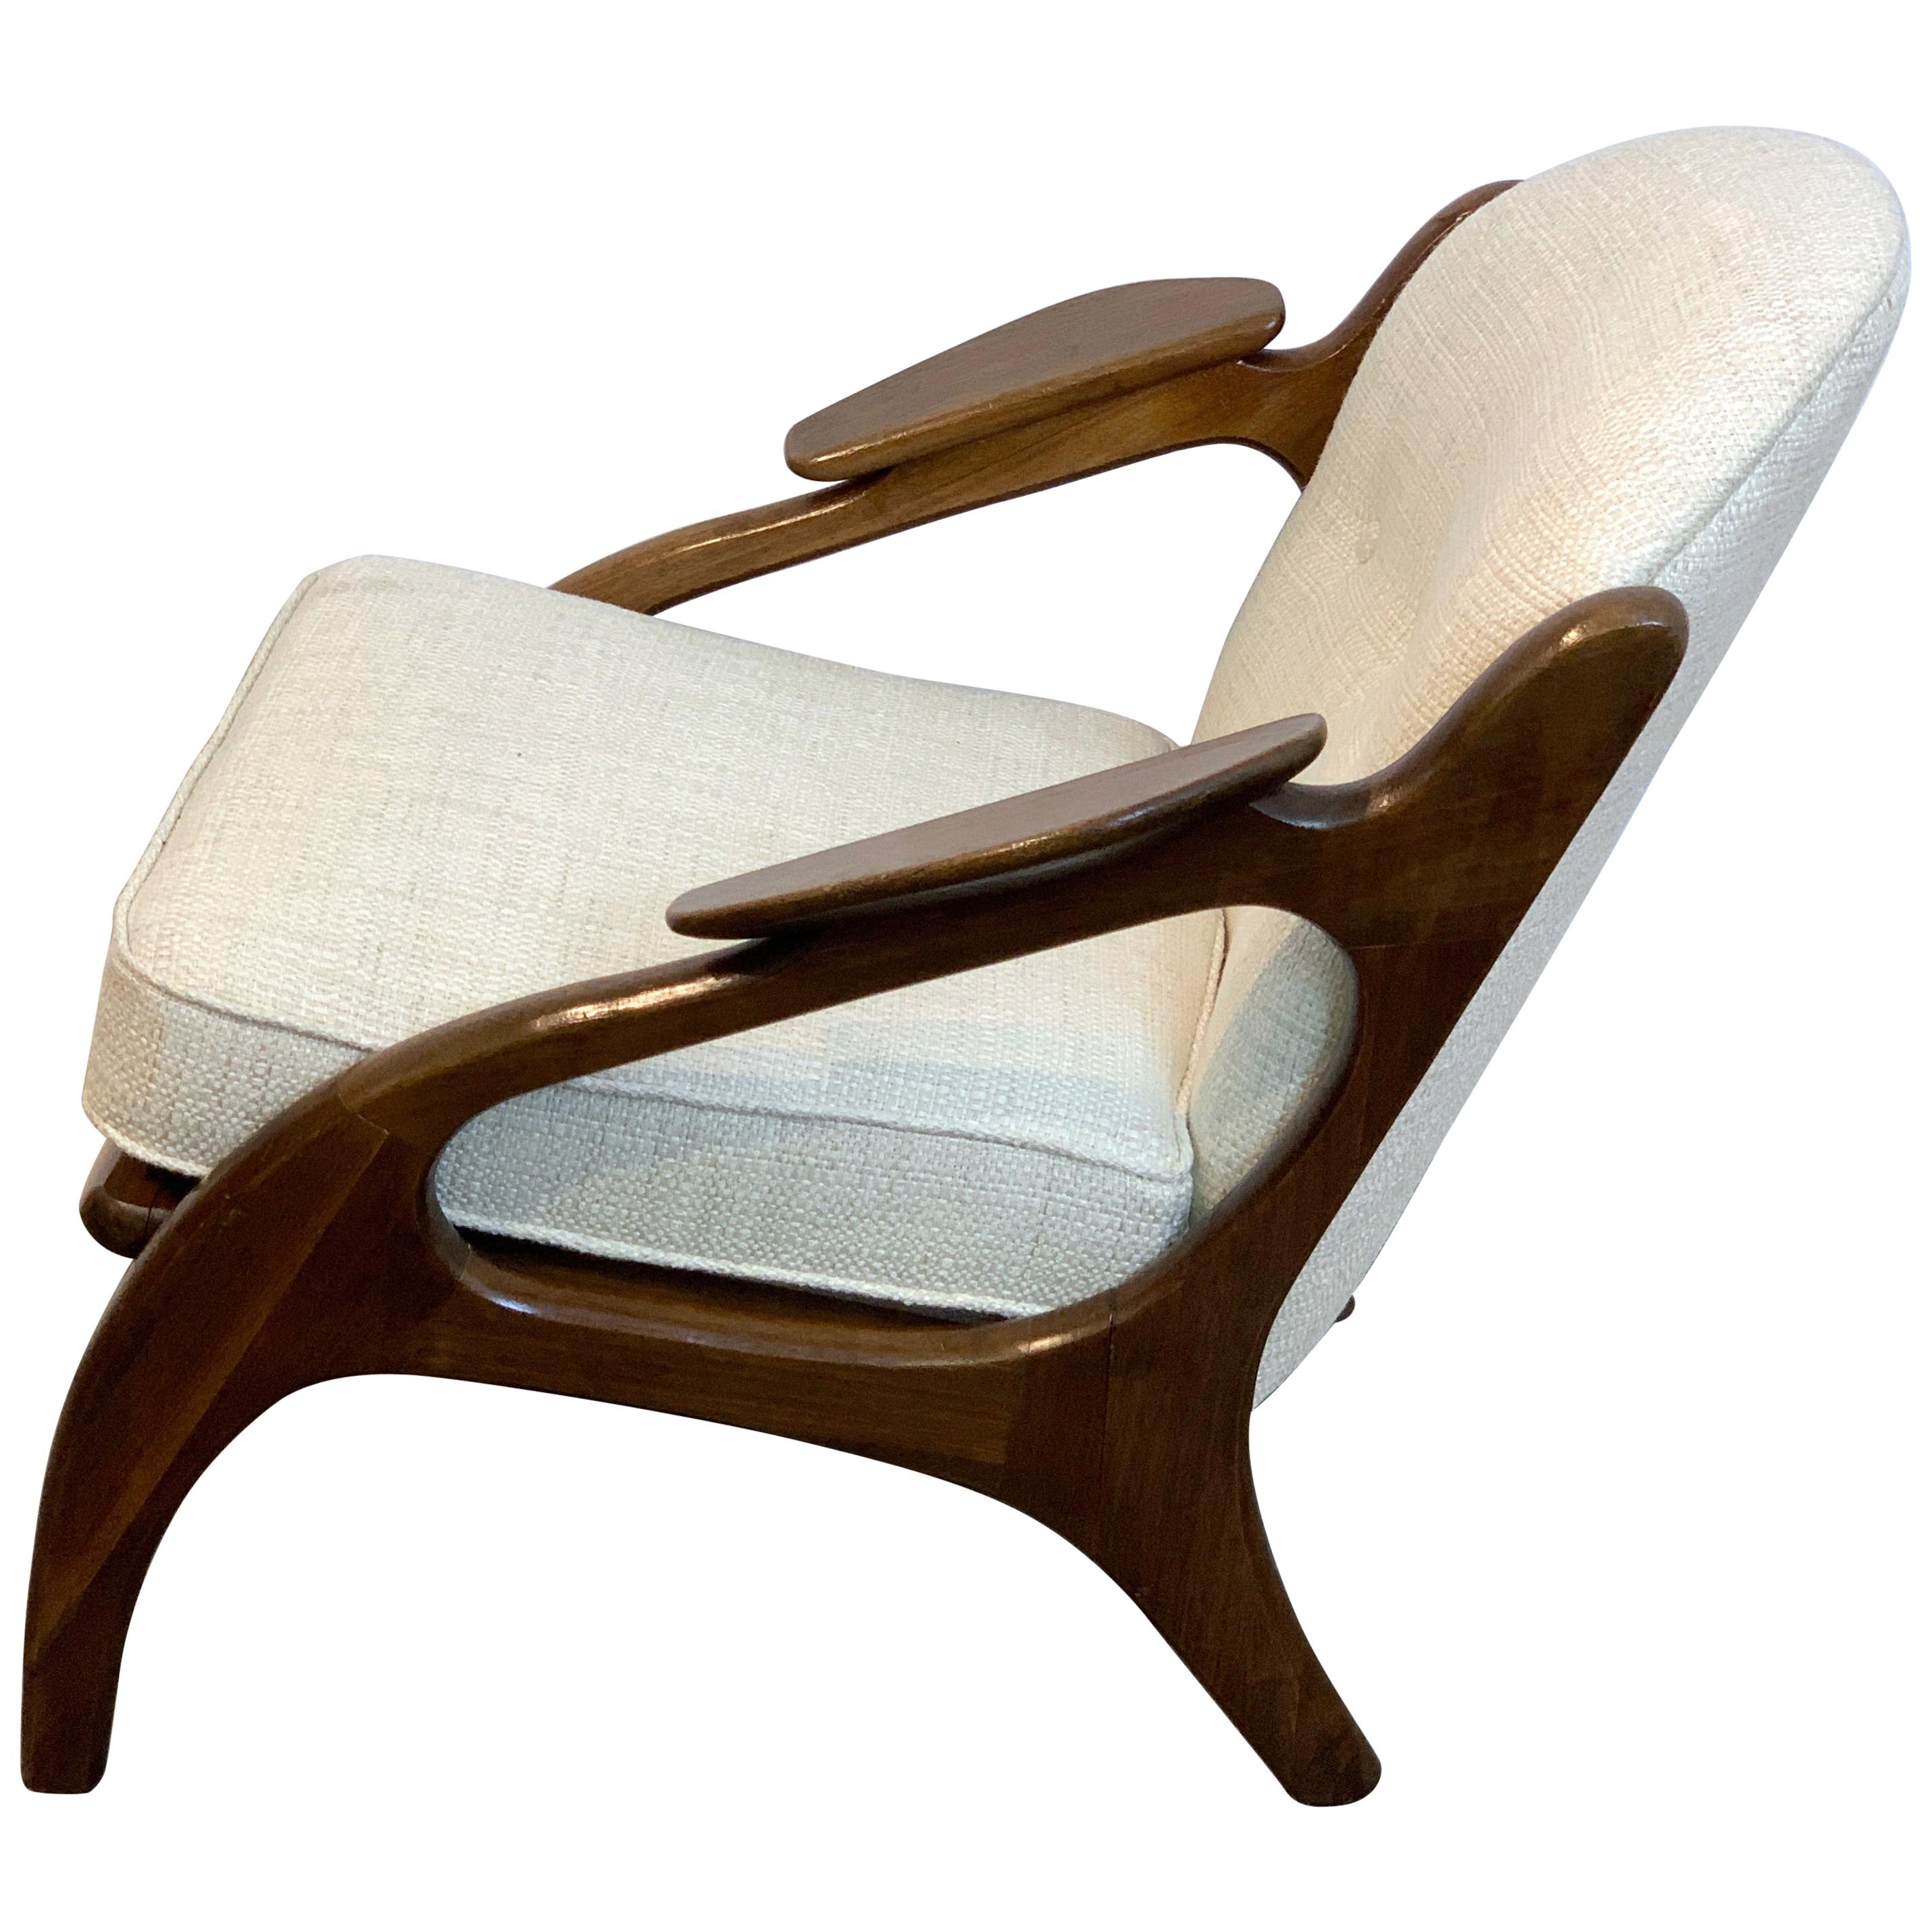 Adrian Pearsall for Craft Associates Lounge Chair #2249-C, Restored